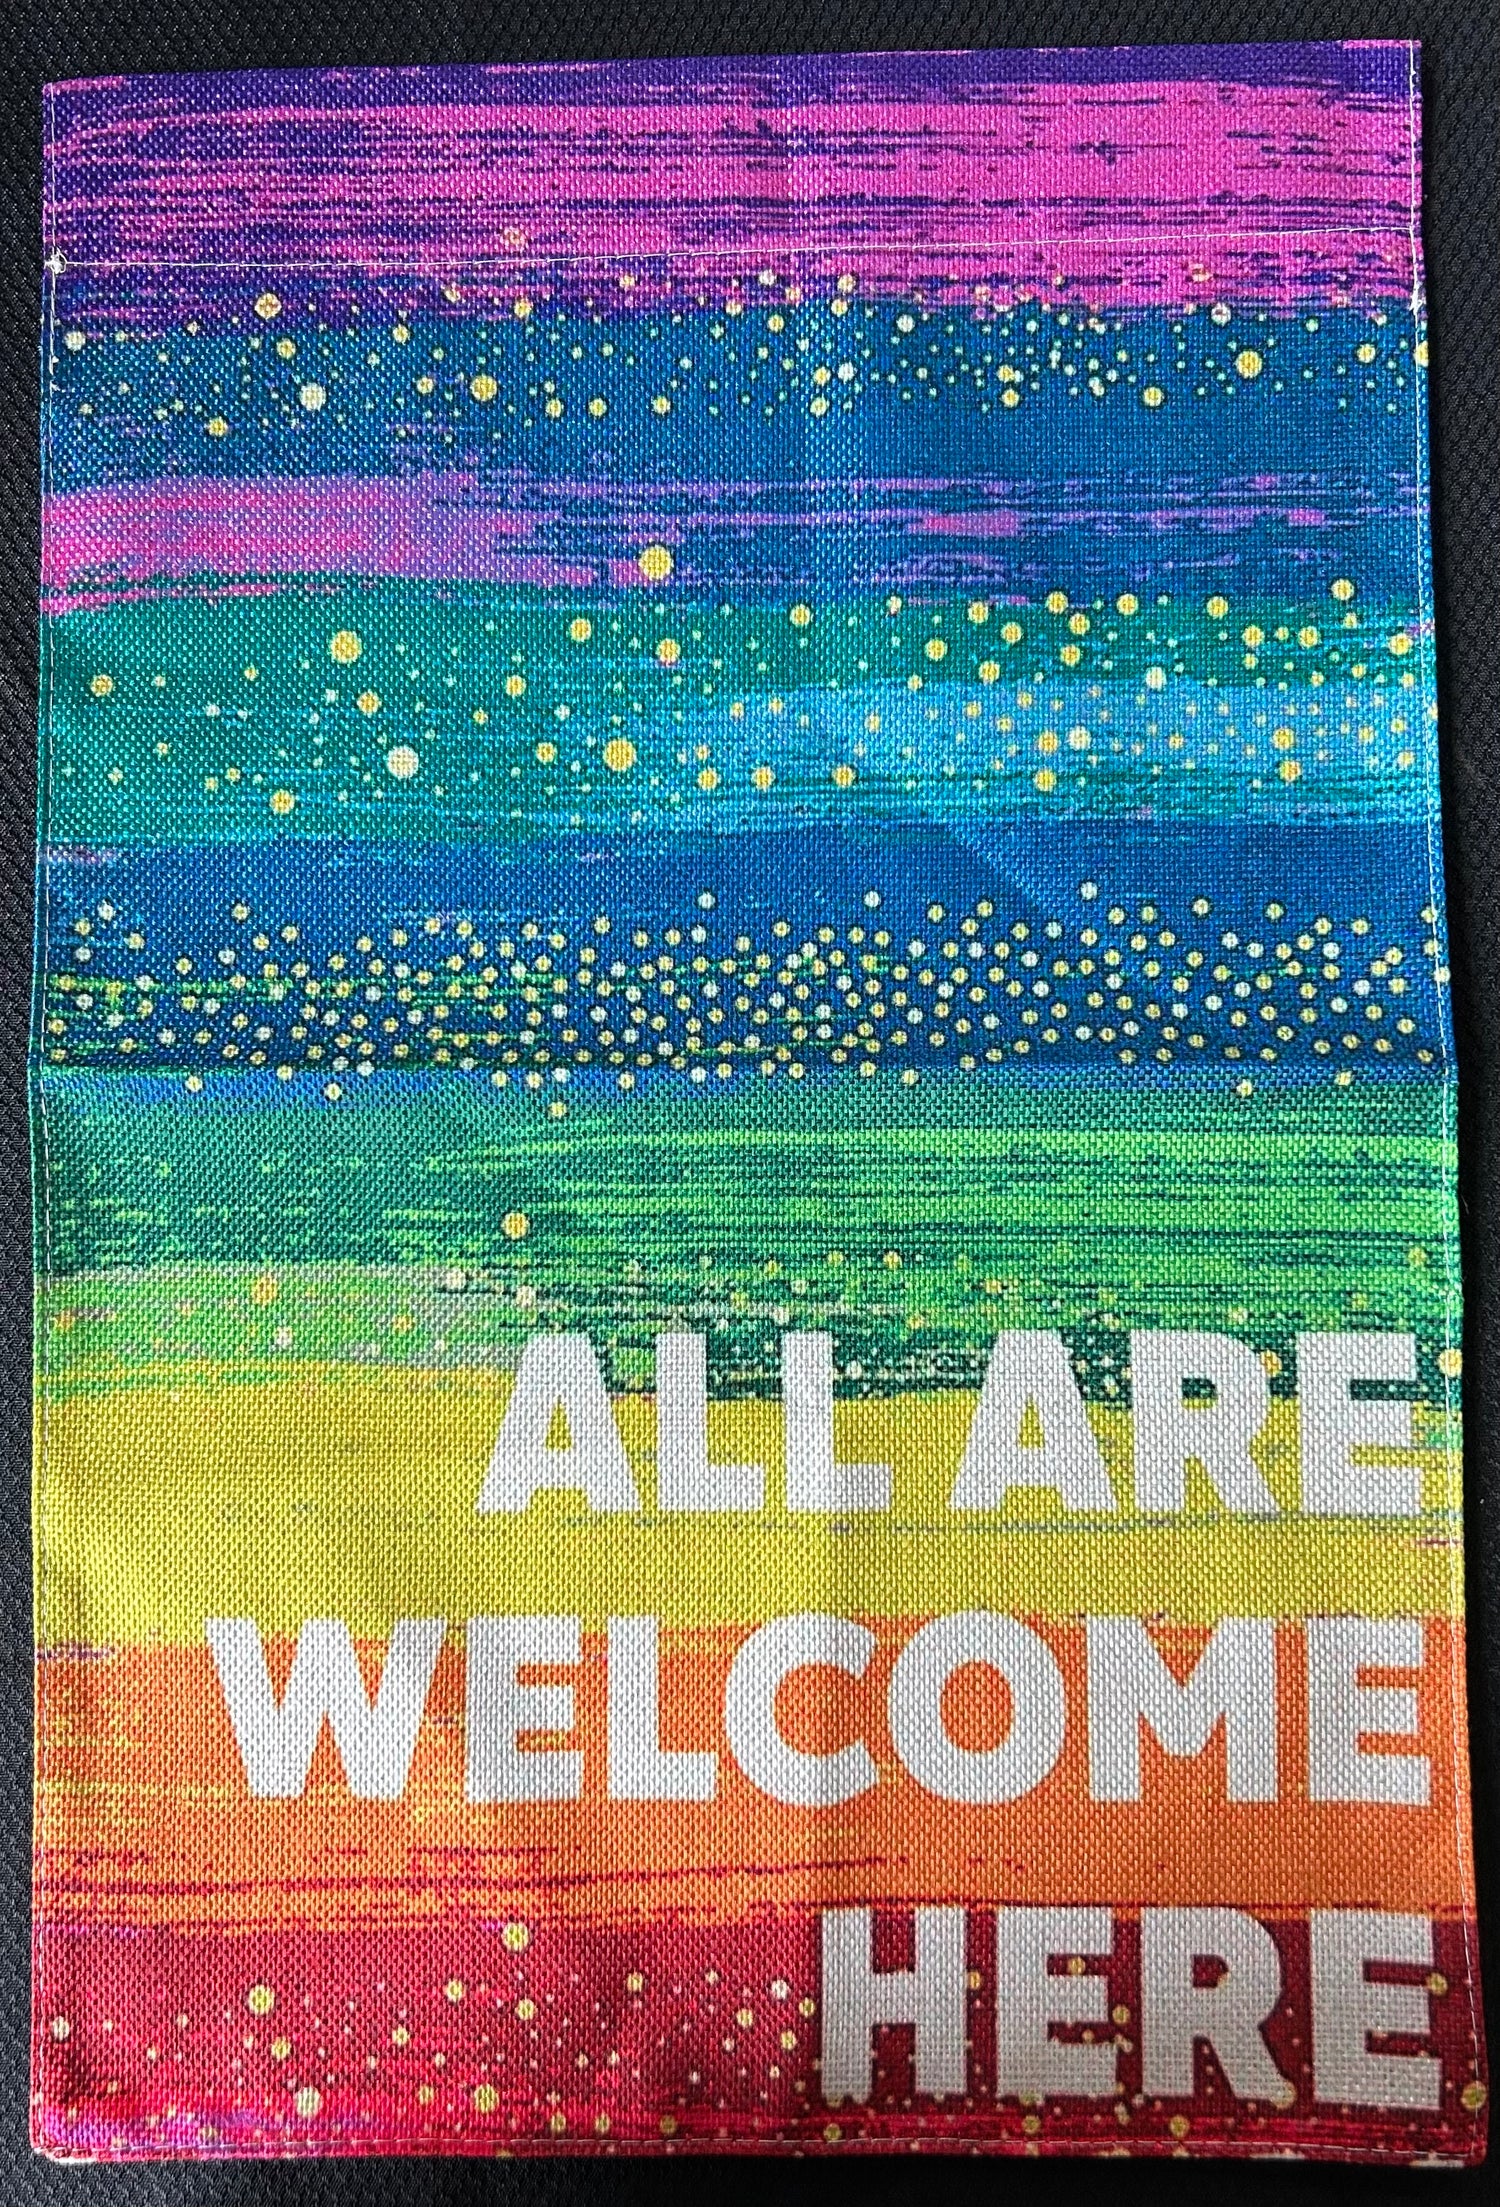 All Are Welcome Here Garden Flag 12"x18", Double Sided Print Flag